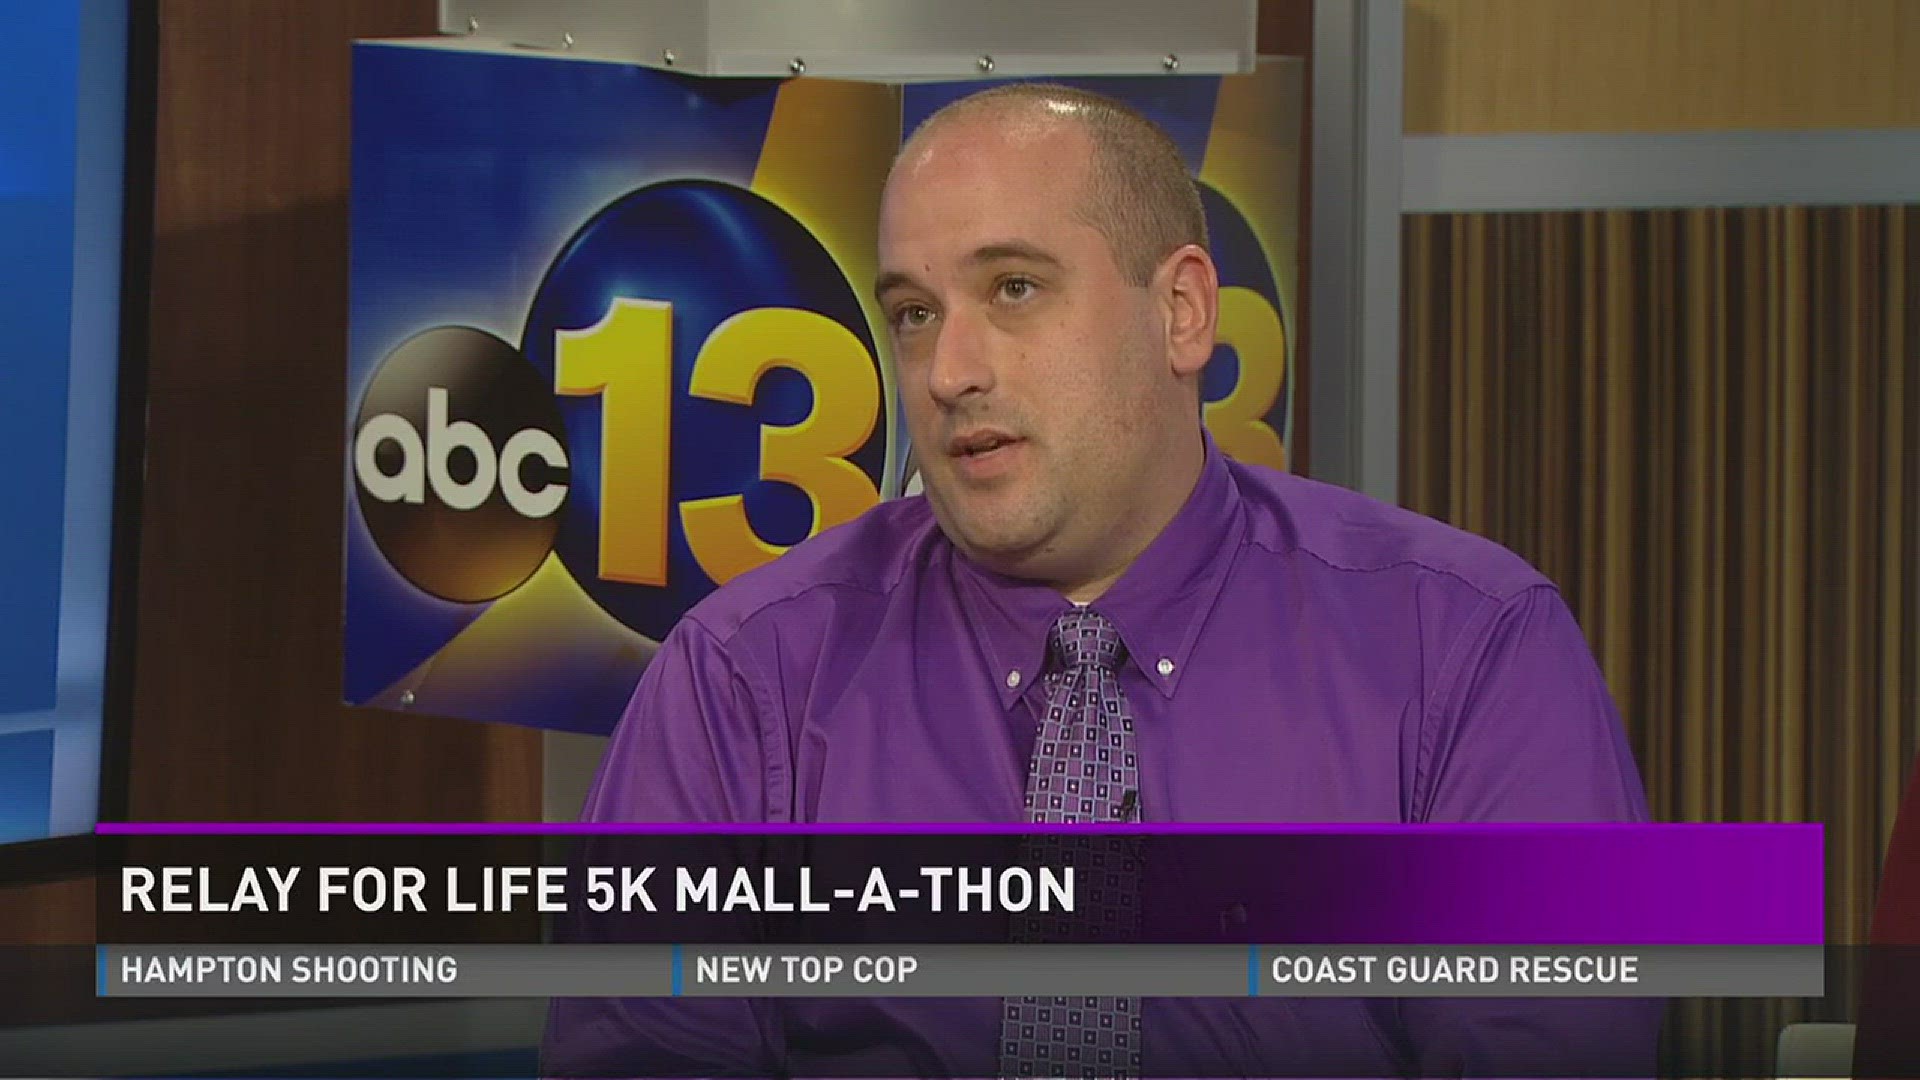 Interview: Relay for Life 5K Mall-a-Thon